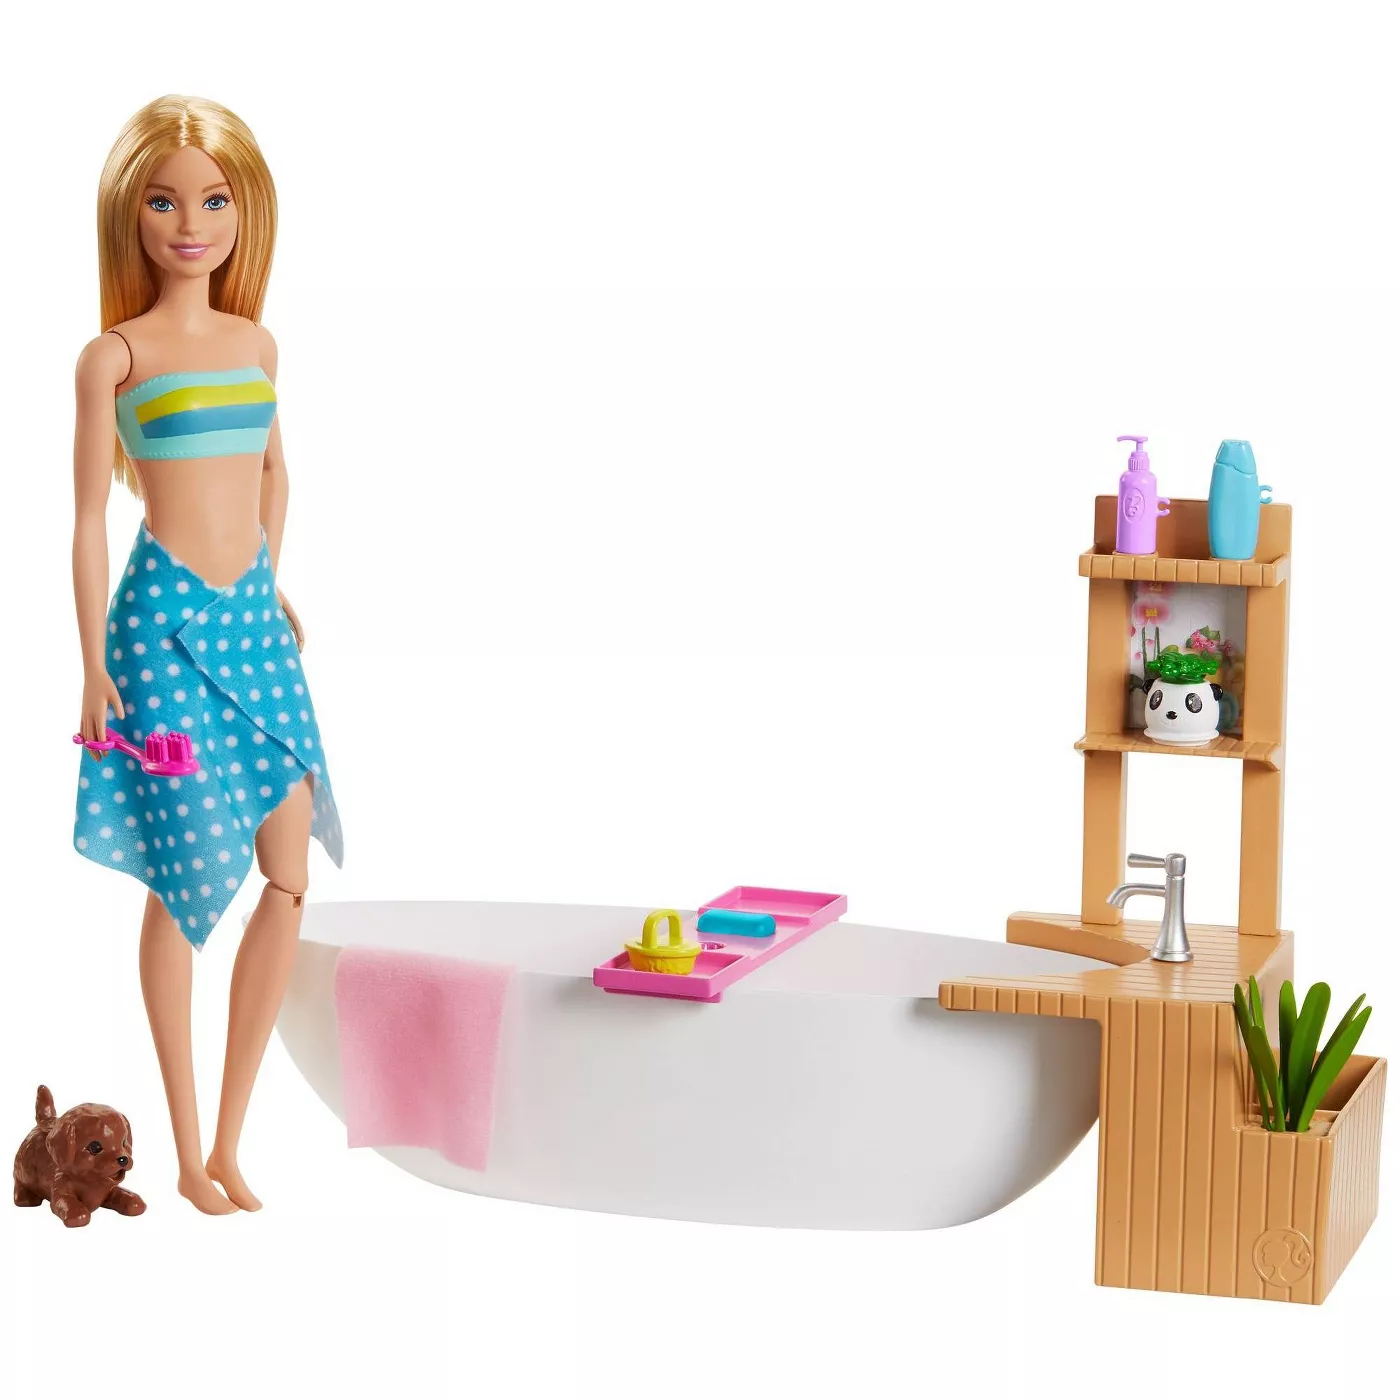 Barbie Fizzy Bath Playset with Doll - image 1 of 5